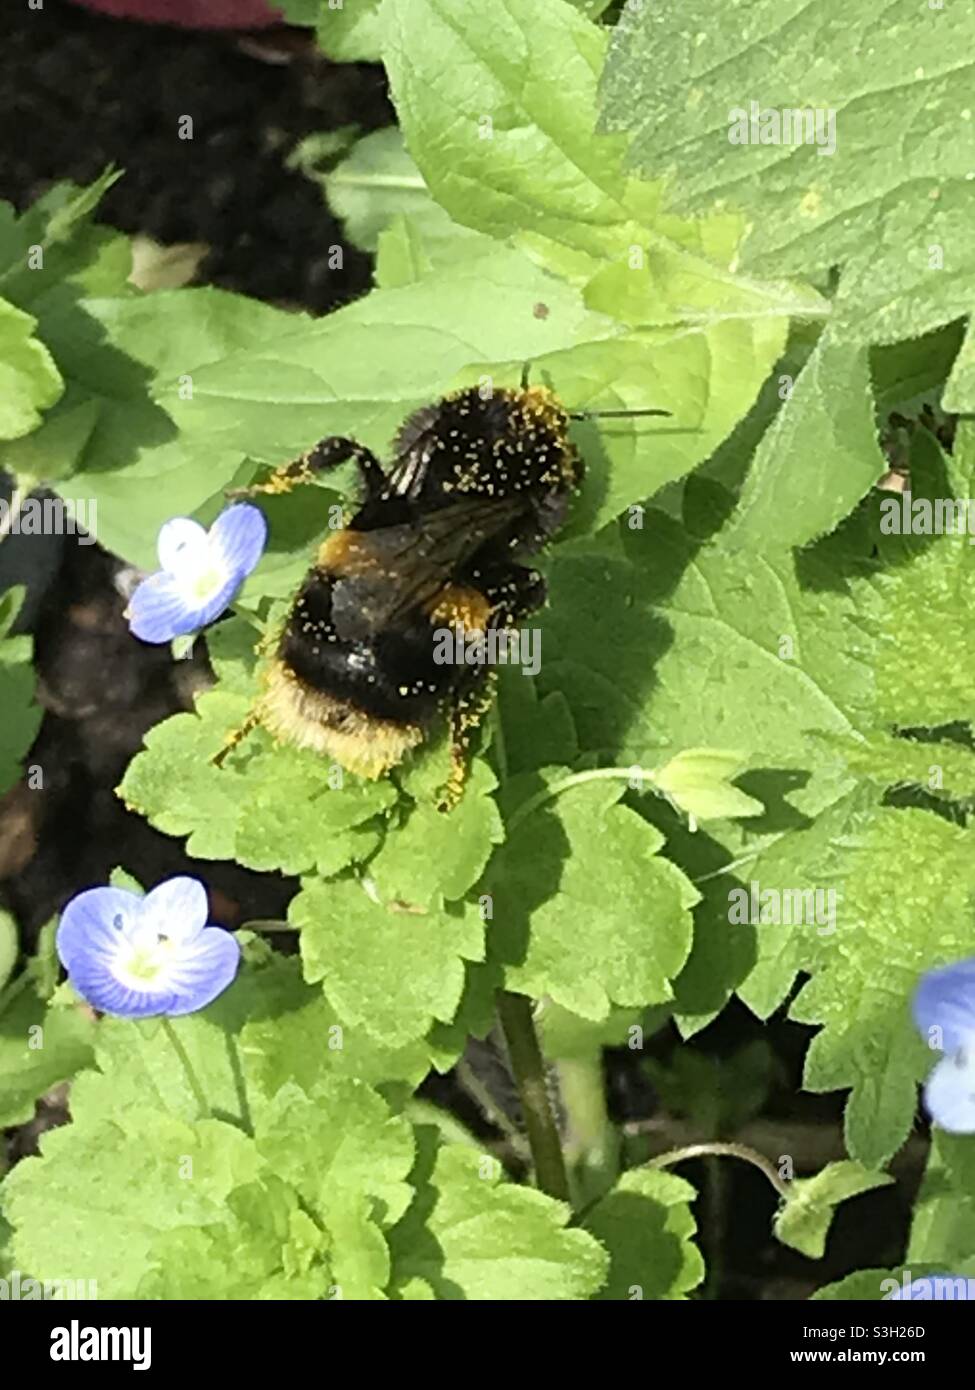 Close up of Bumble Bee with white bottom covered in pollen specks walking across leaves and blue flowers Stock Photo